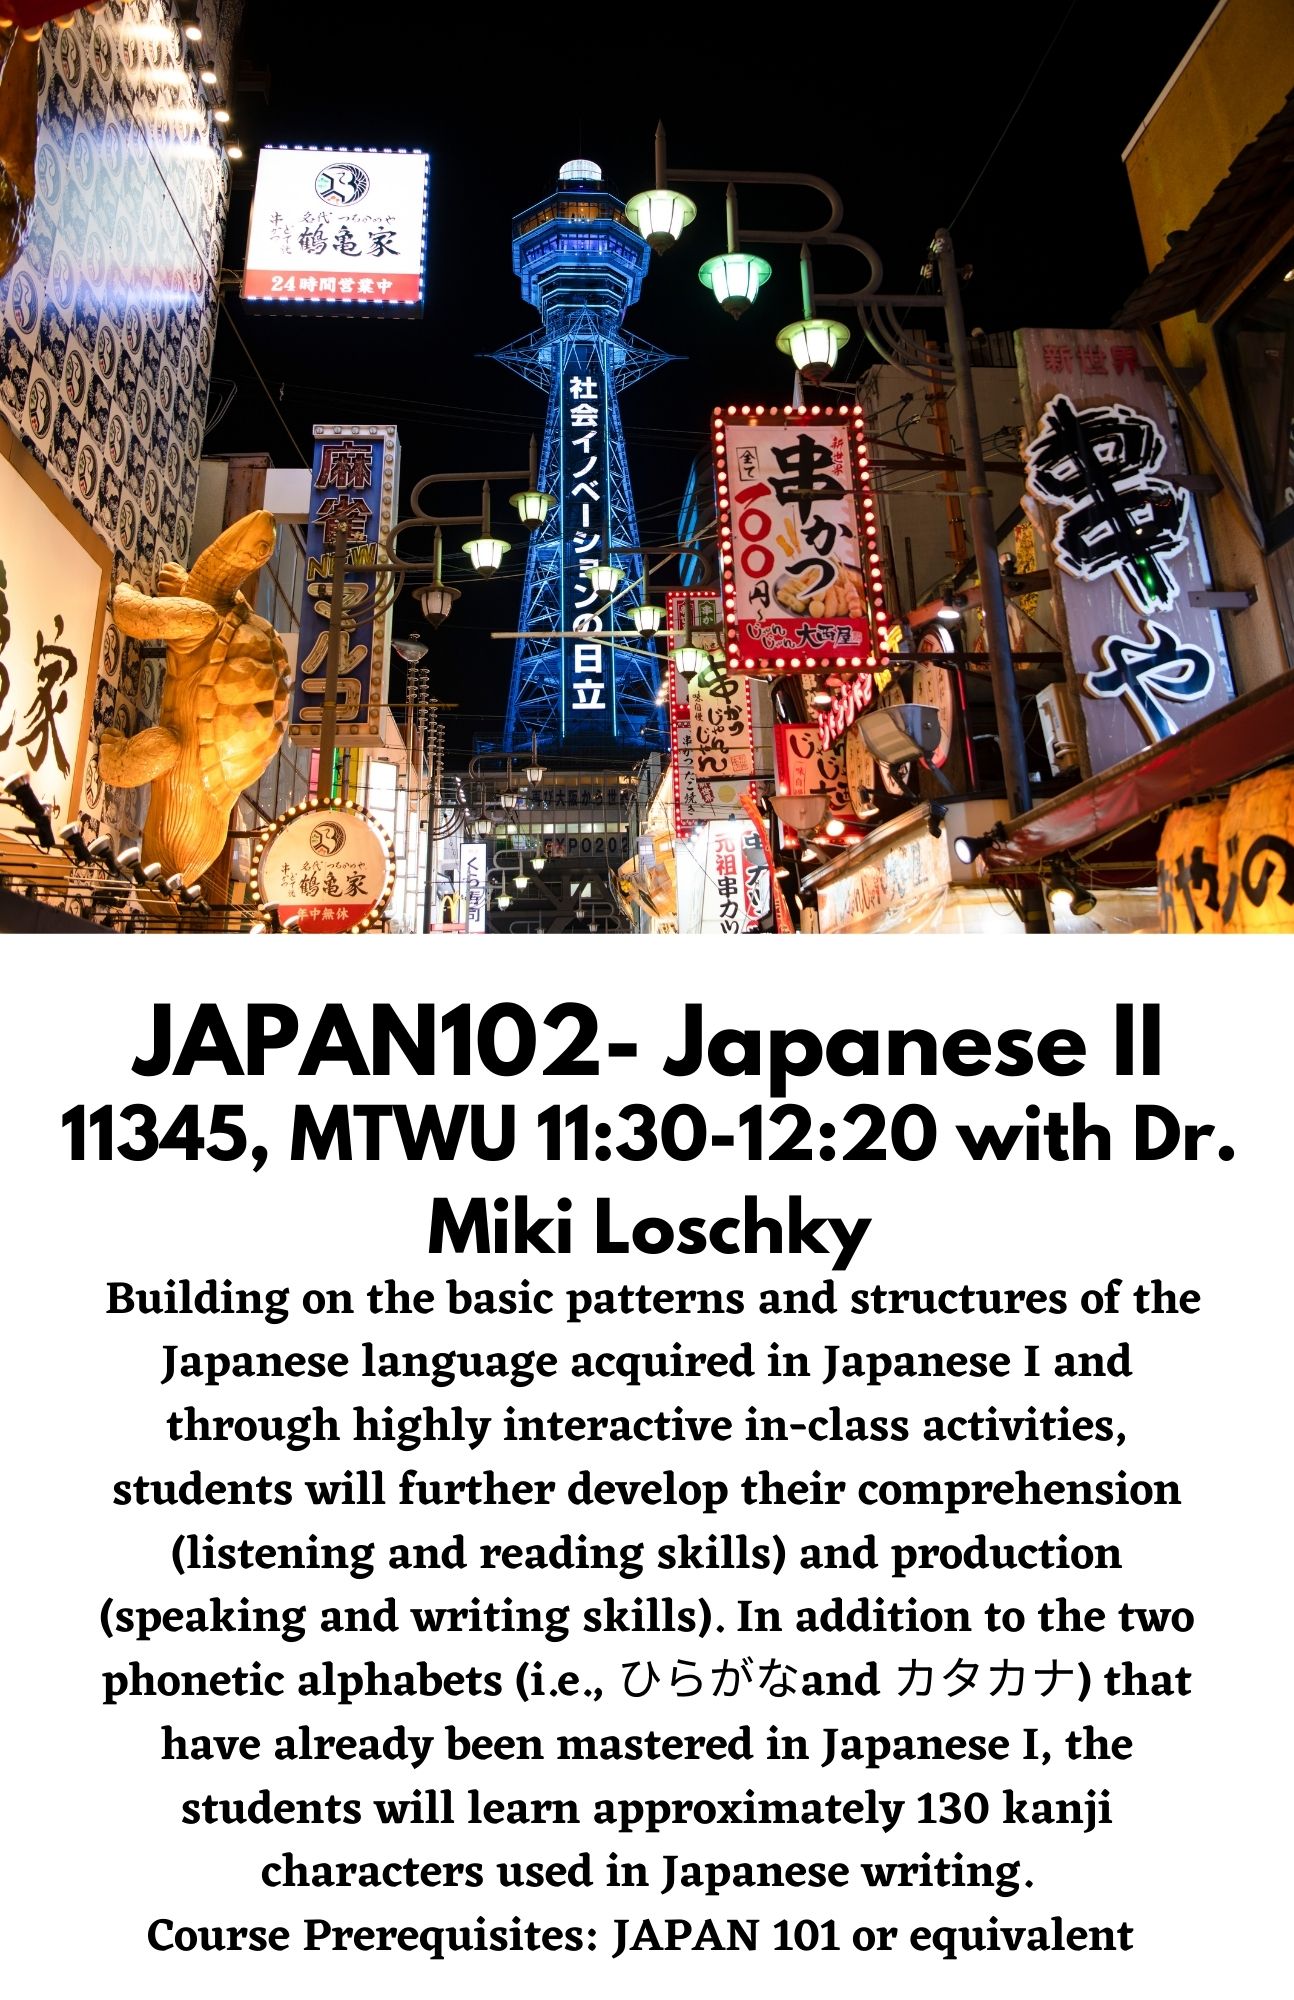 JAPAN102- Japanese II. 11345, MTWU 11:30-12:20 with Dr. Miki Loschky. Building on the basic patterns and structures of the Japanese language acquired in Japanese I and through highly interactive in-class activities, students will further develop their comprehension (listening and reading skills) and production (speaking and writing skills). In addition to the two phonetic alphabets (i.e., ひらがなand カタカナ) that have already been mastered in Japanese I, the students will learn approximately 130 kanji characters used in Japanese writing. Course Prerequisites: JAPAN 101 or equivalent